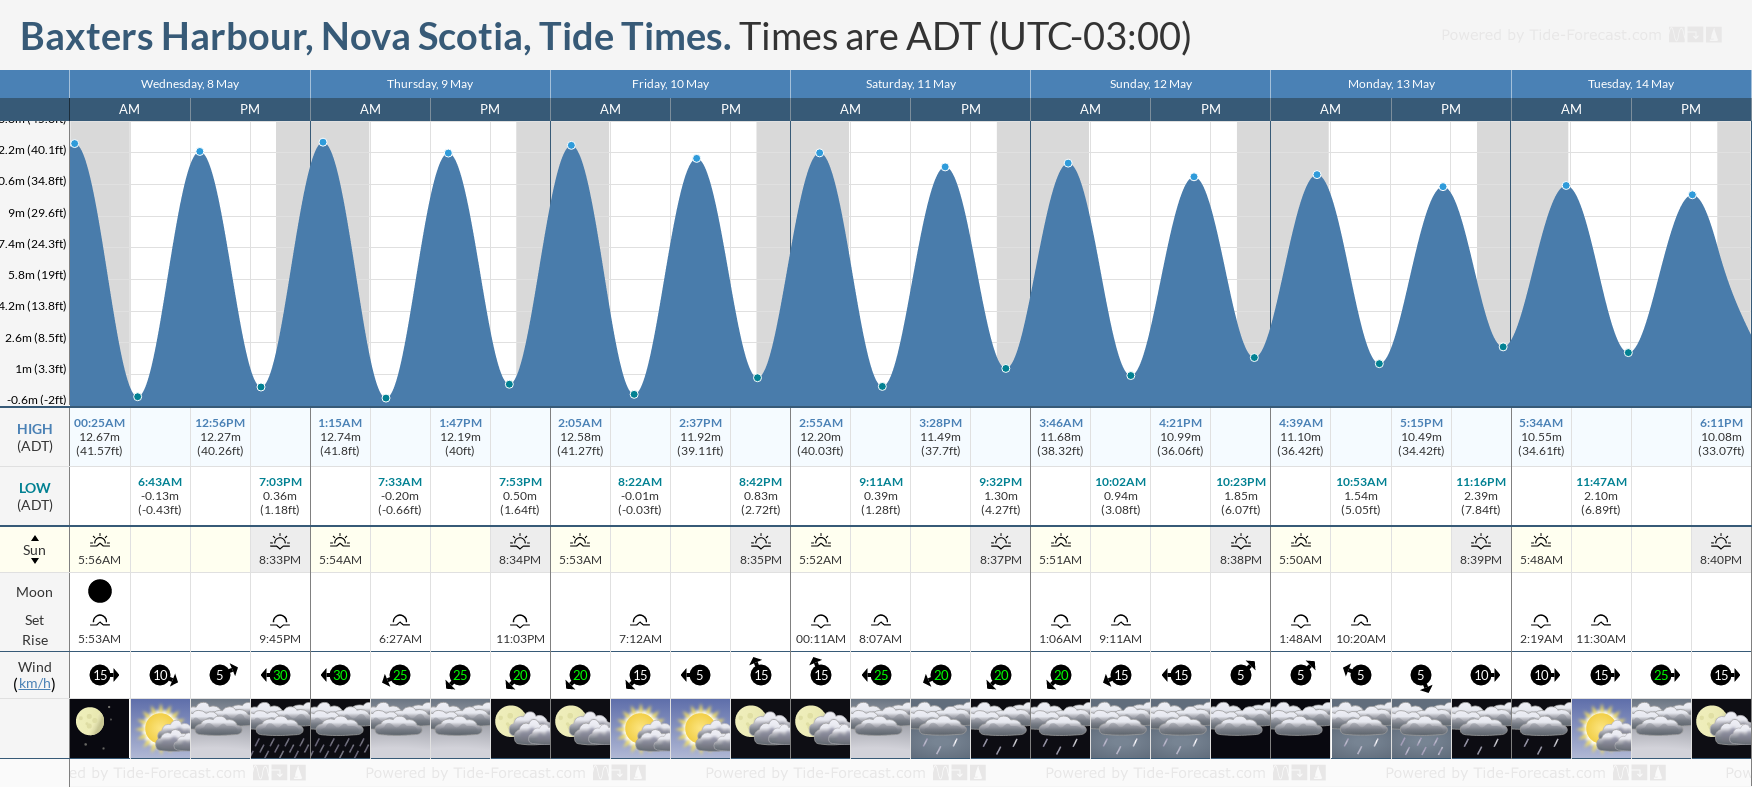 Baxters Harbour, Nova Scotia Tide Chart including high and low tide tide times for the next 7 days